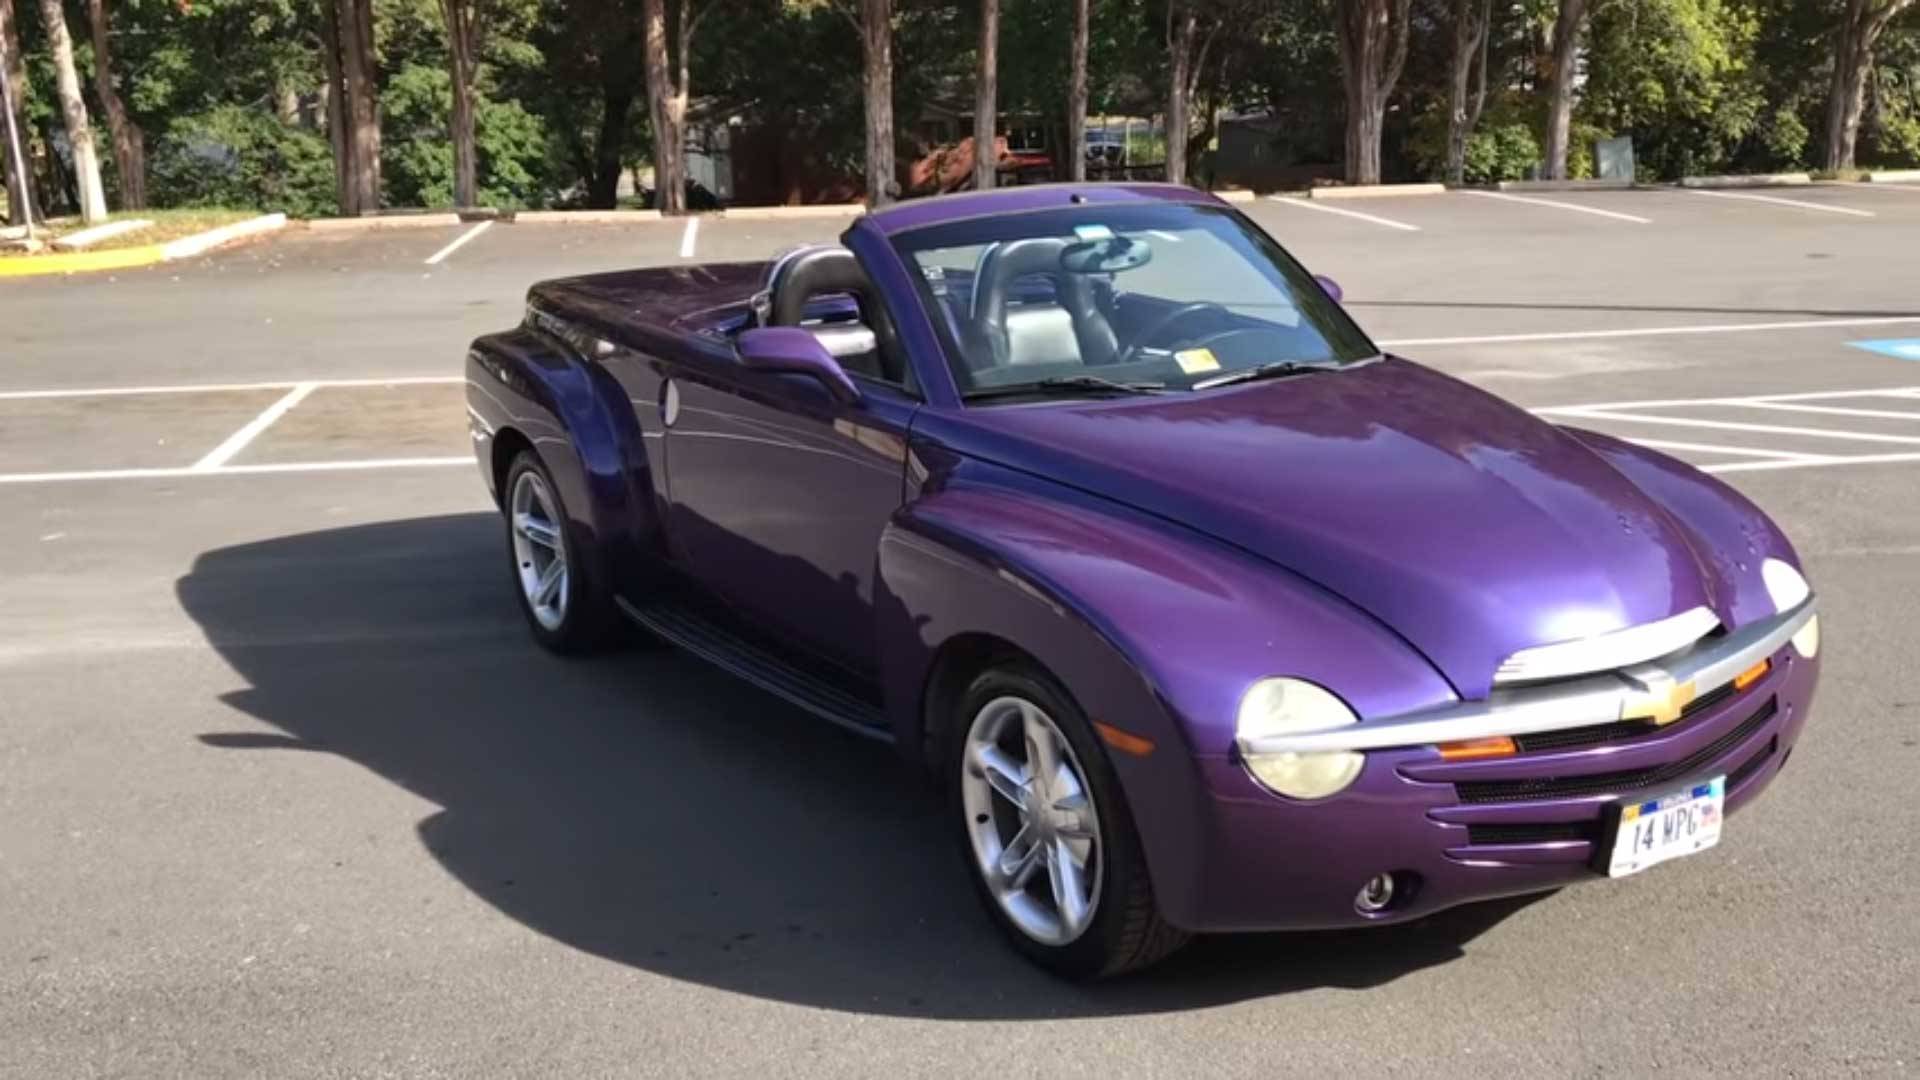 Find Out Why The Chevy SSR Was The Epitome Of Quirkiness